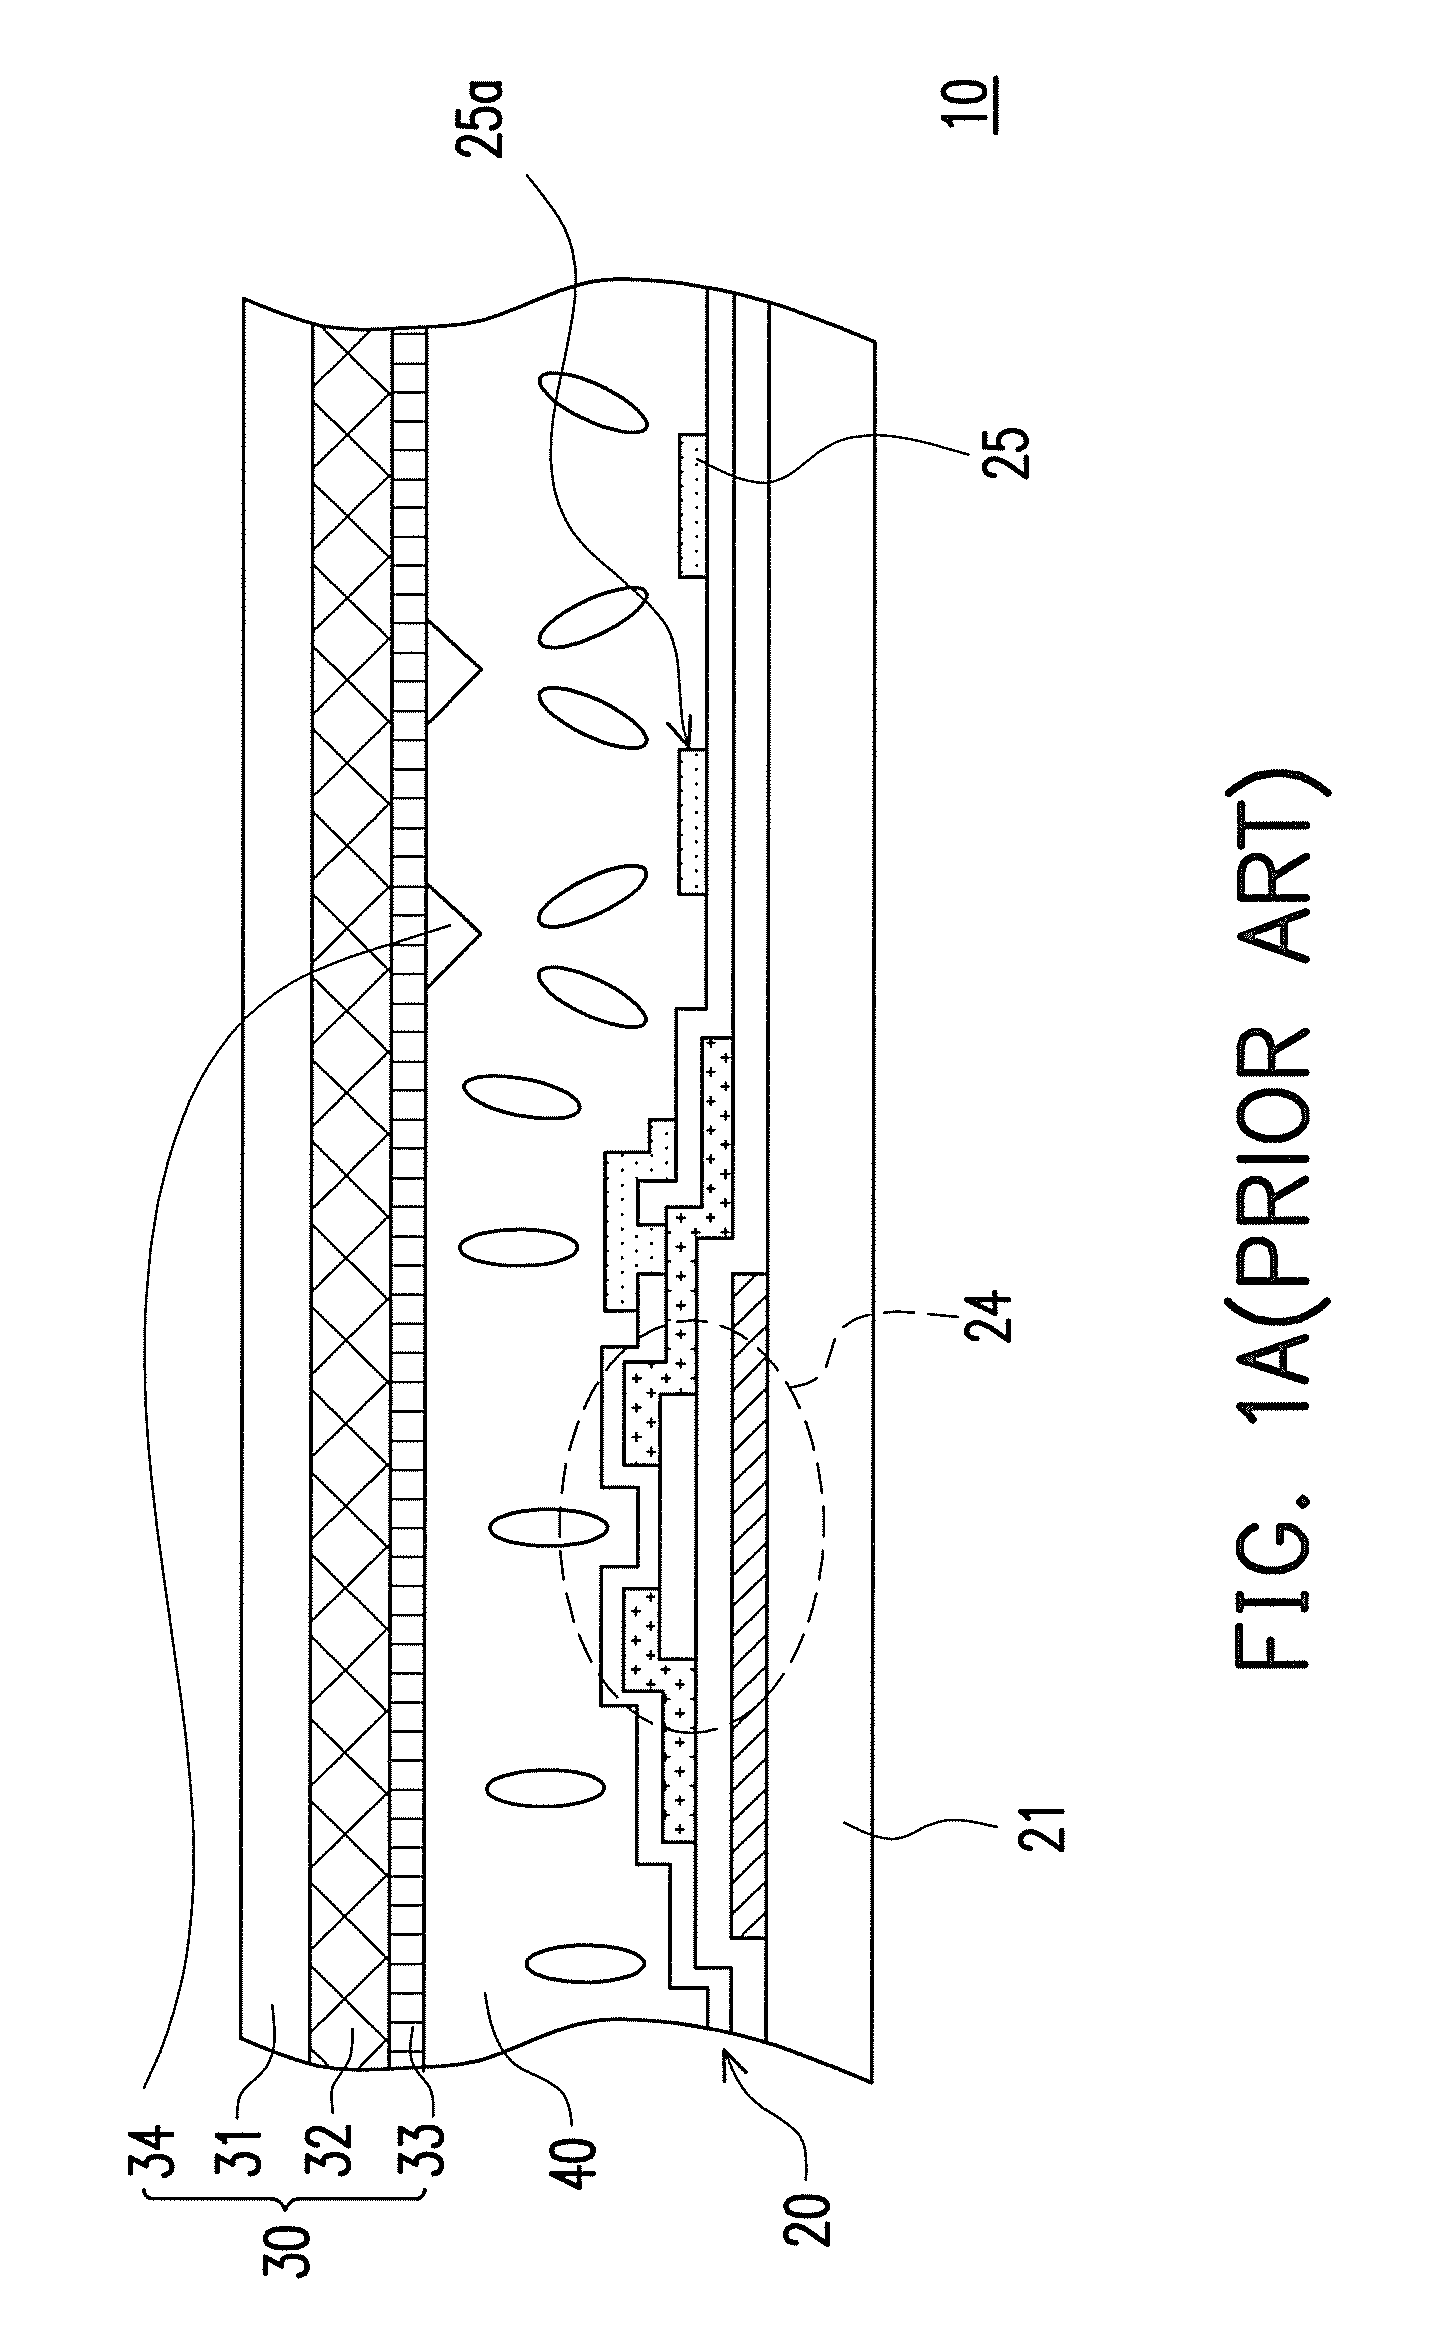 Pixel structure and liquid crystal display panel